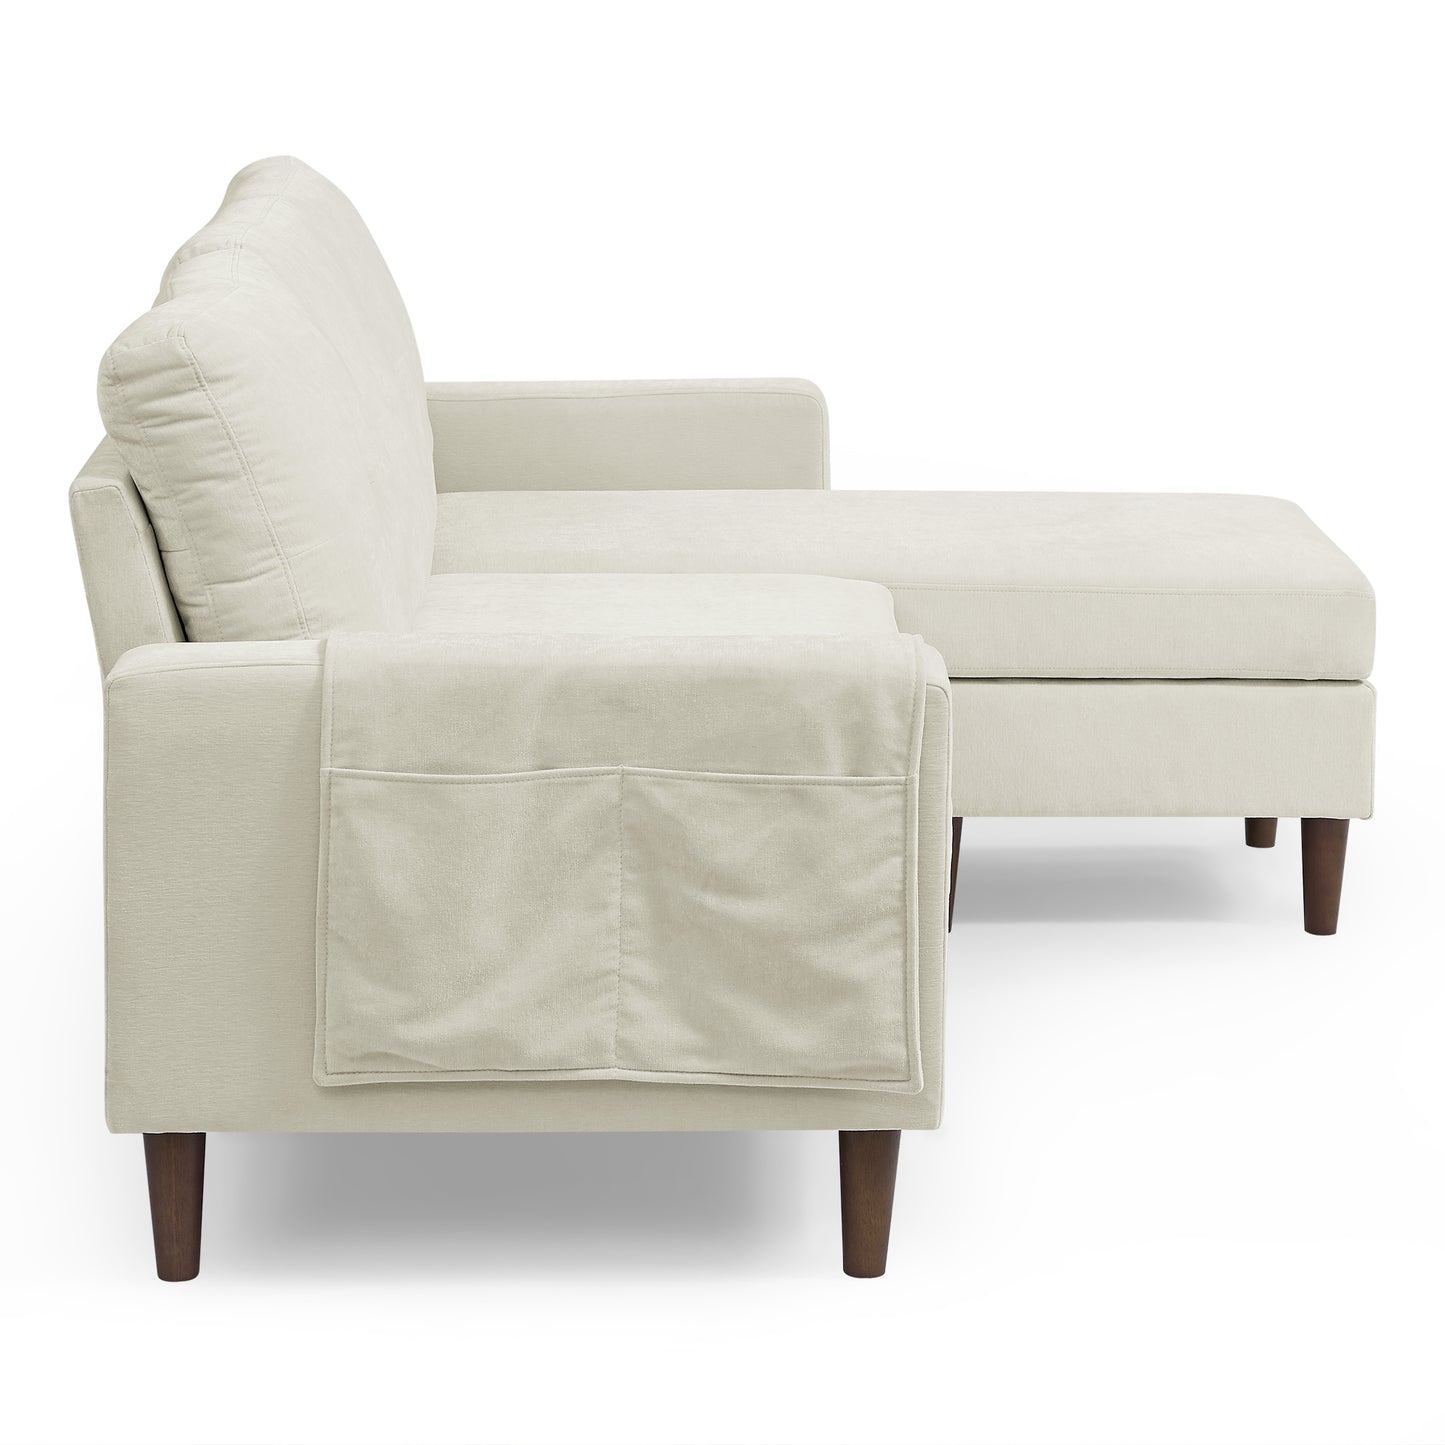 Sectional Sofa Couch; 3 Seats L-shape Sofa with Removable Cushions